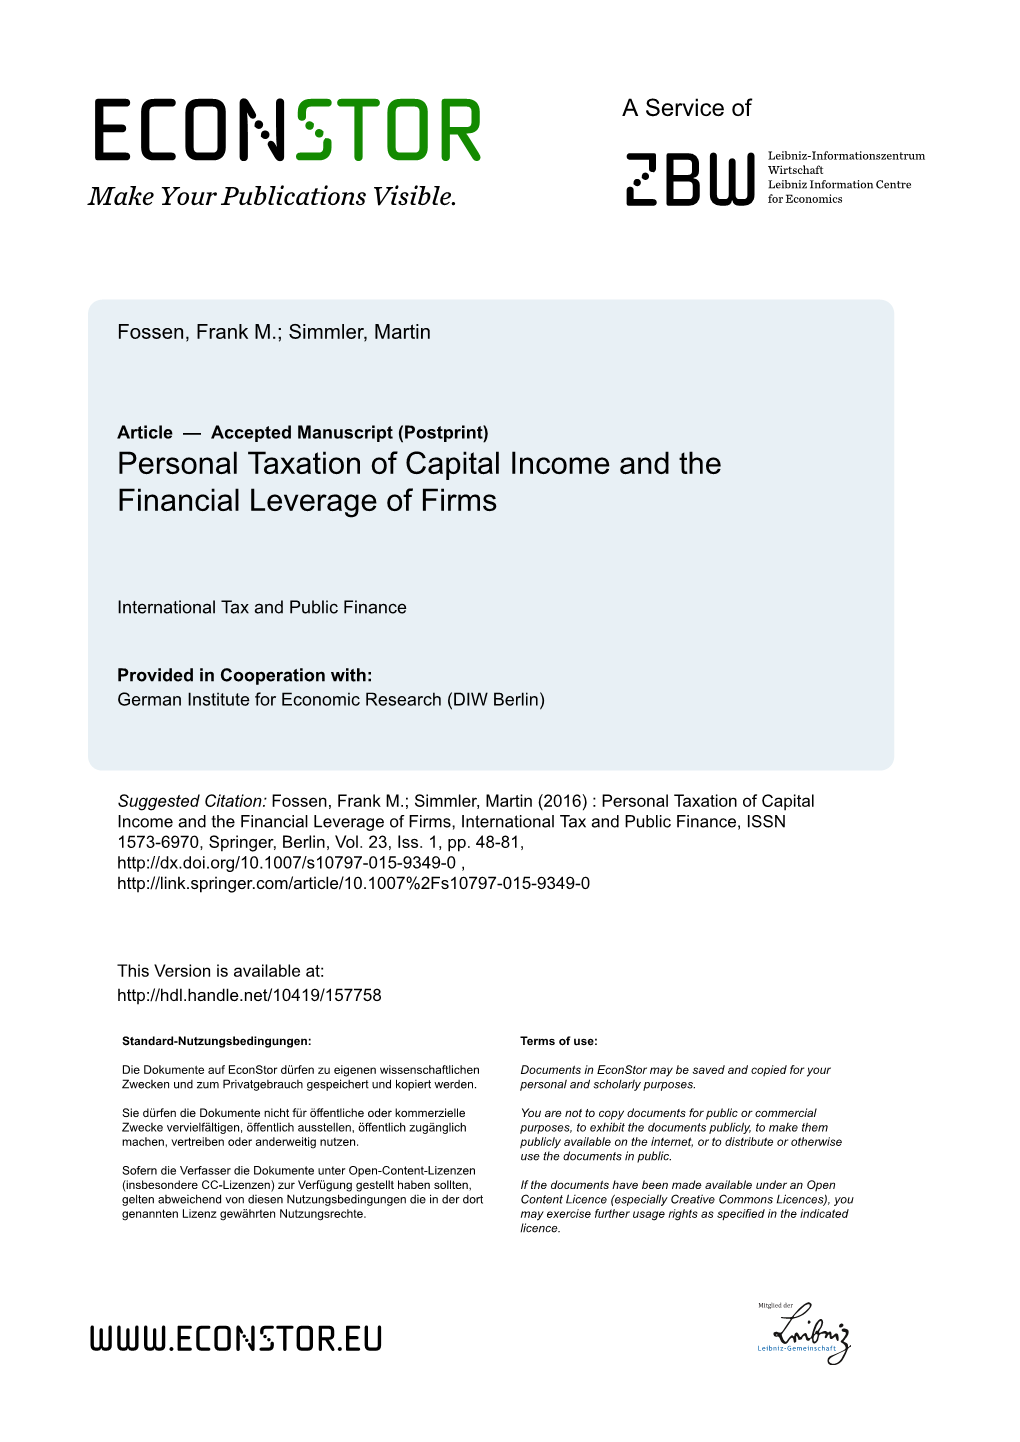 Personal Taxation of Capital Income and the Financial Leverage of Firms